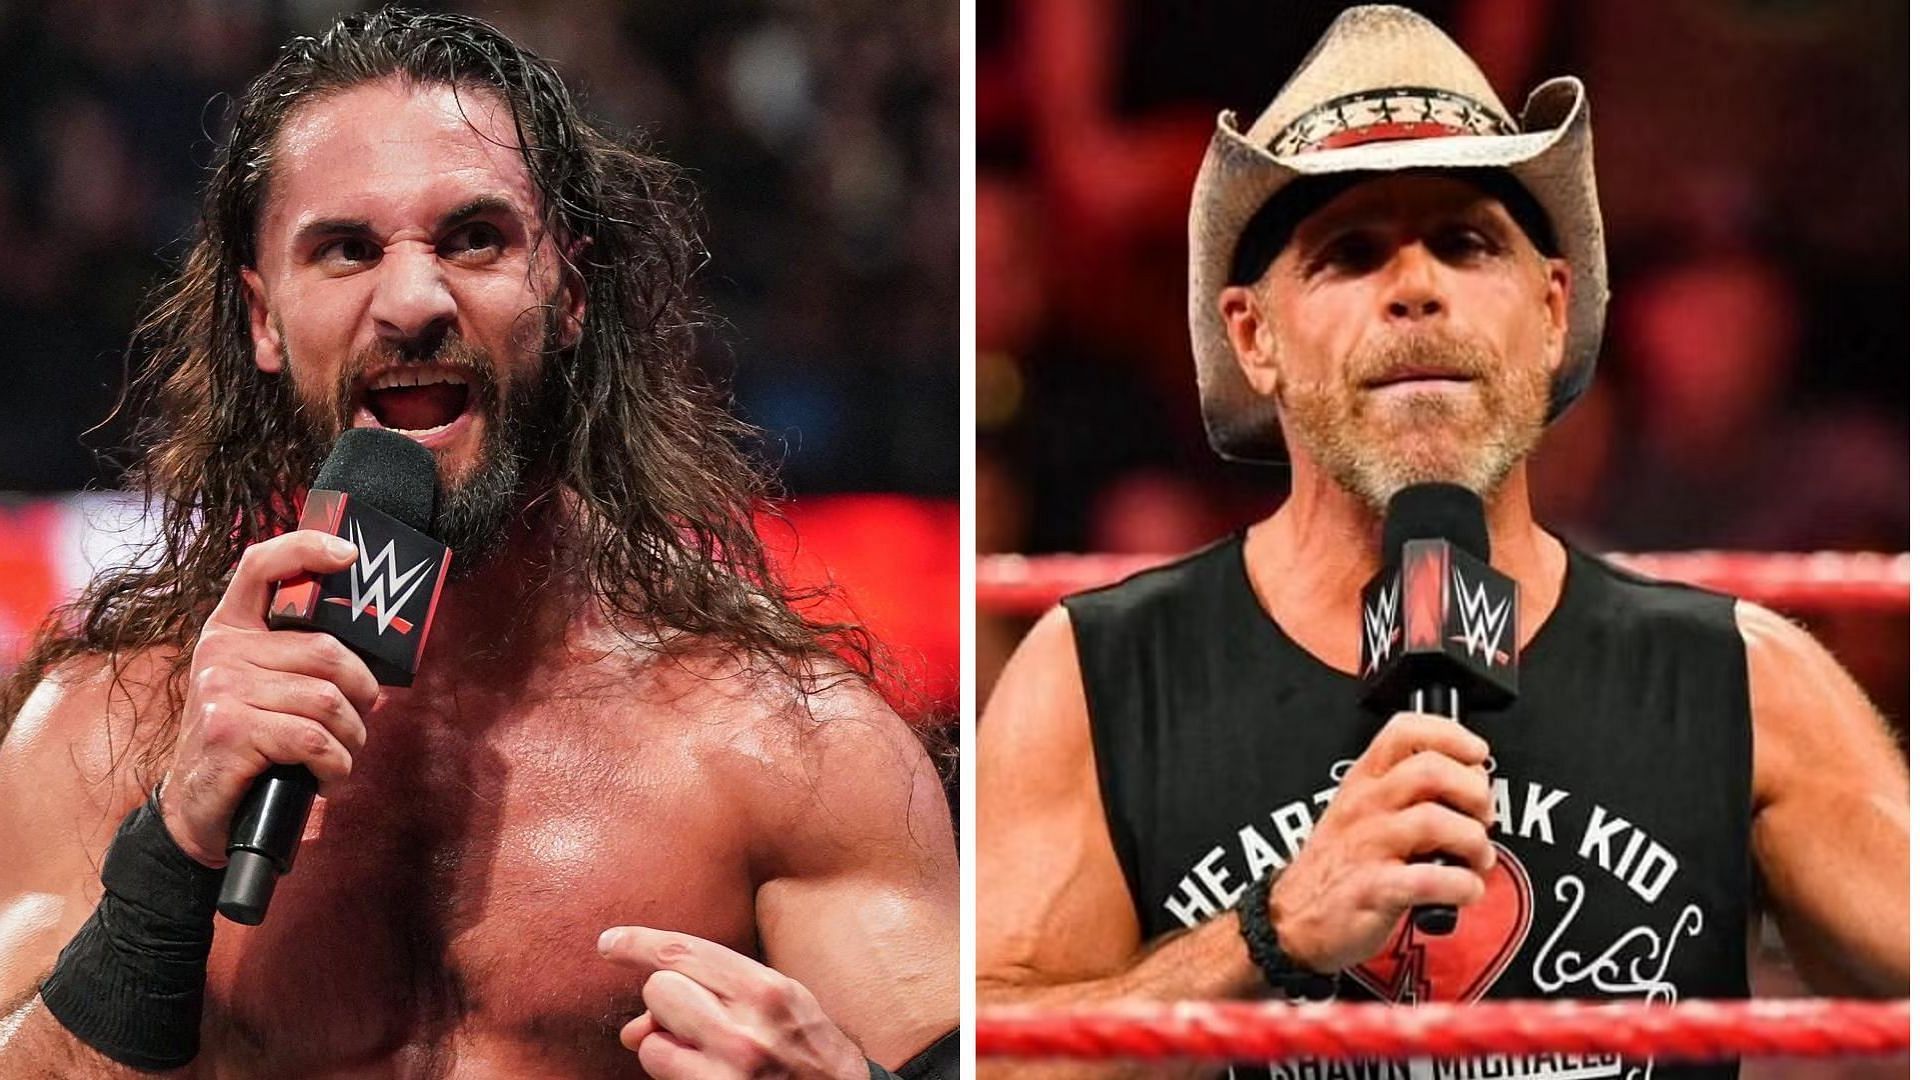 WWE RAW star Seth Rollins was recently compared to Shawn Michaels